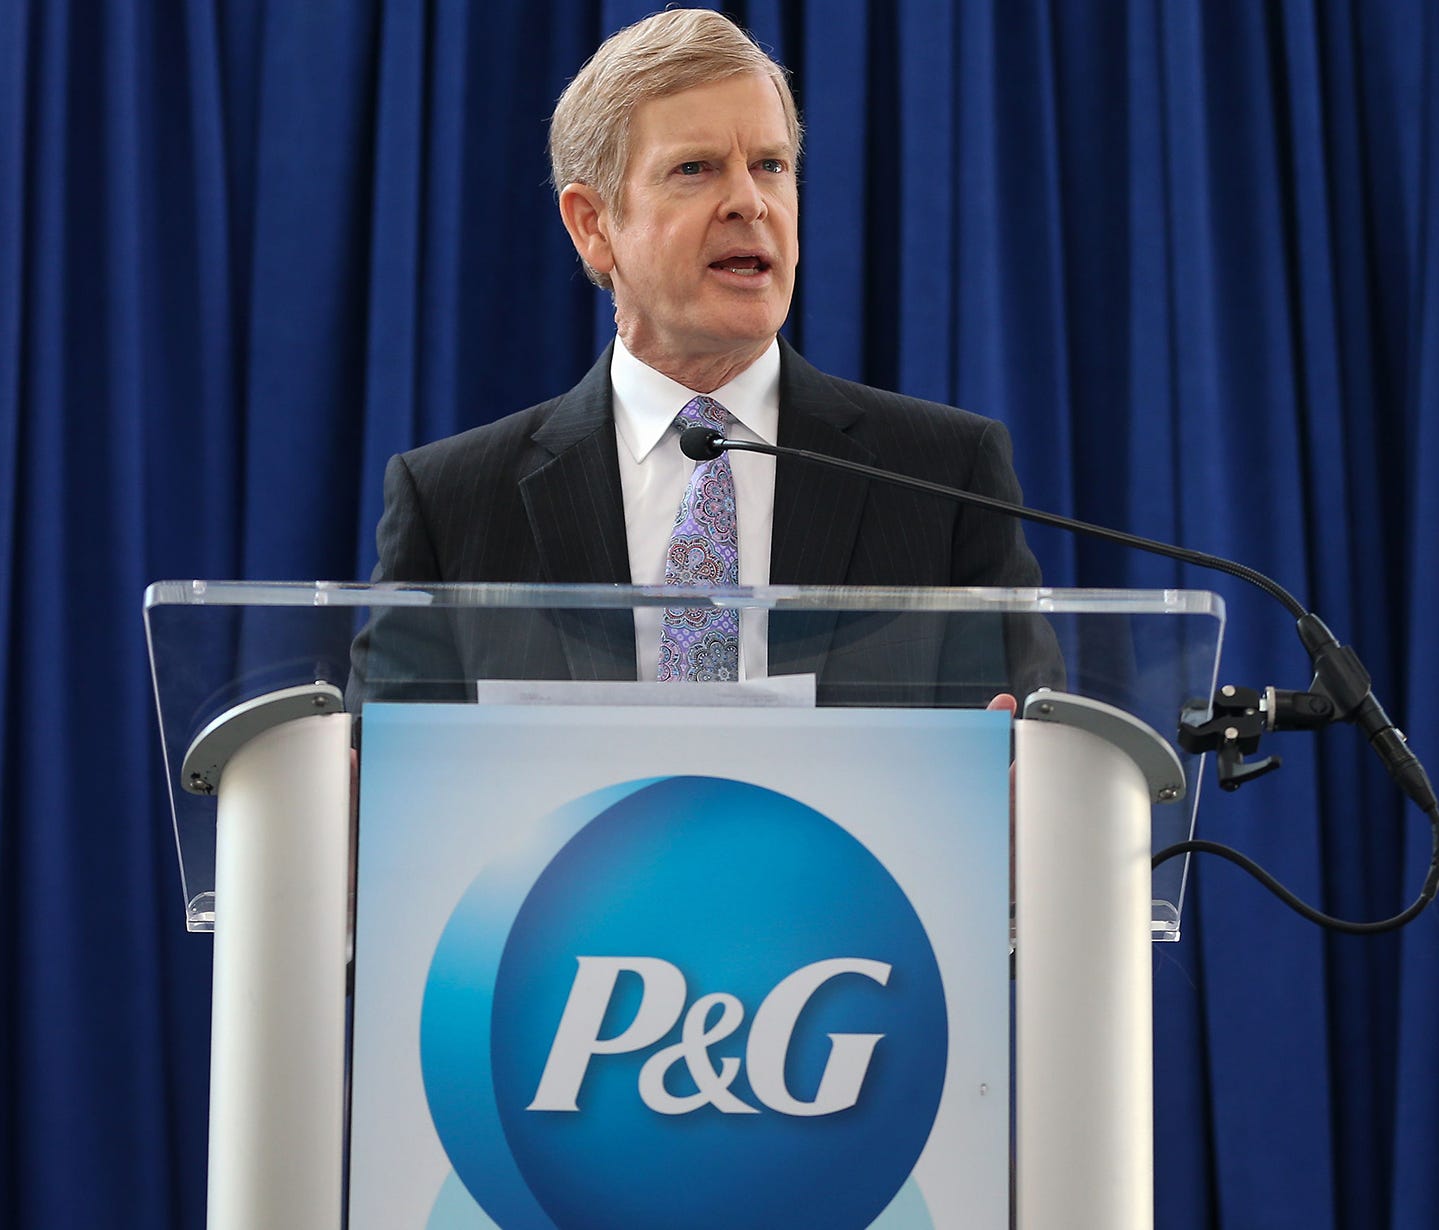 Procter & Gamble CEO David Taylor answers questions at a news conference after P&G's shareholder vote, which prevented Trian Partners CEO Nelson Peltz a seat on the company's board, Tuesday, Oct. 10, 2017, in Cincinnati. The company reported Friday, 